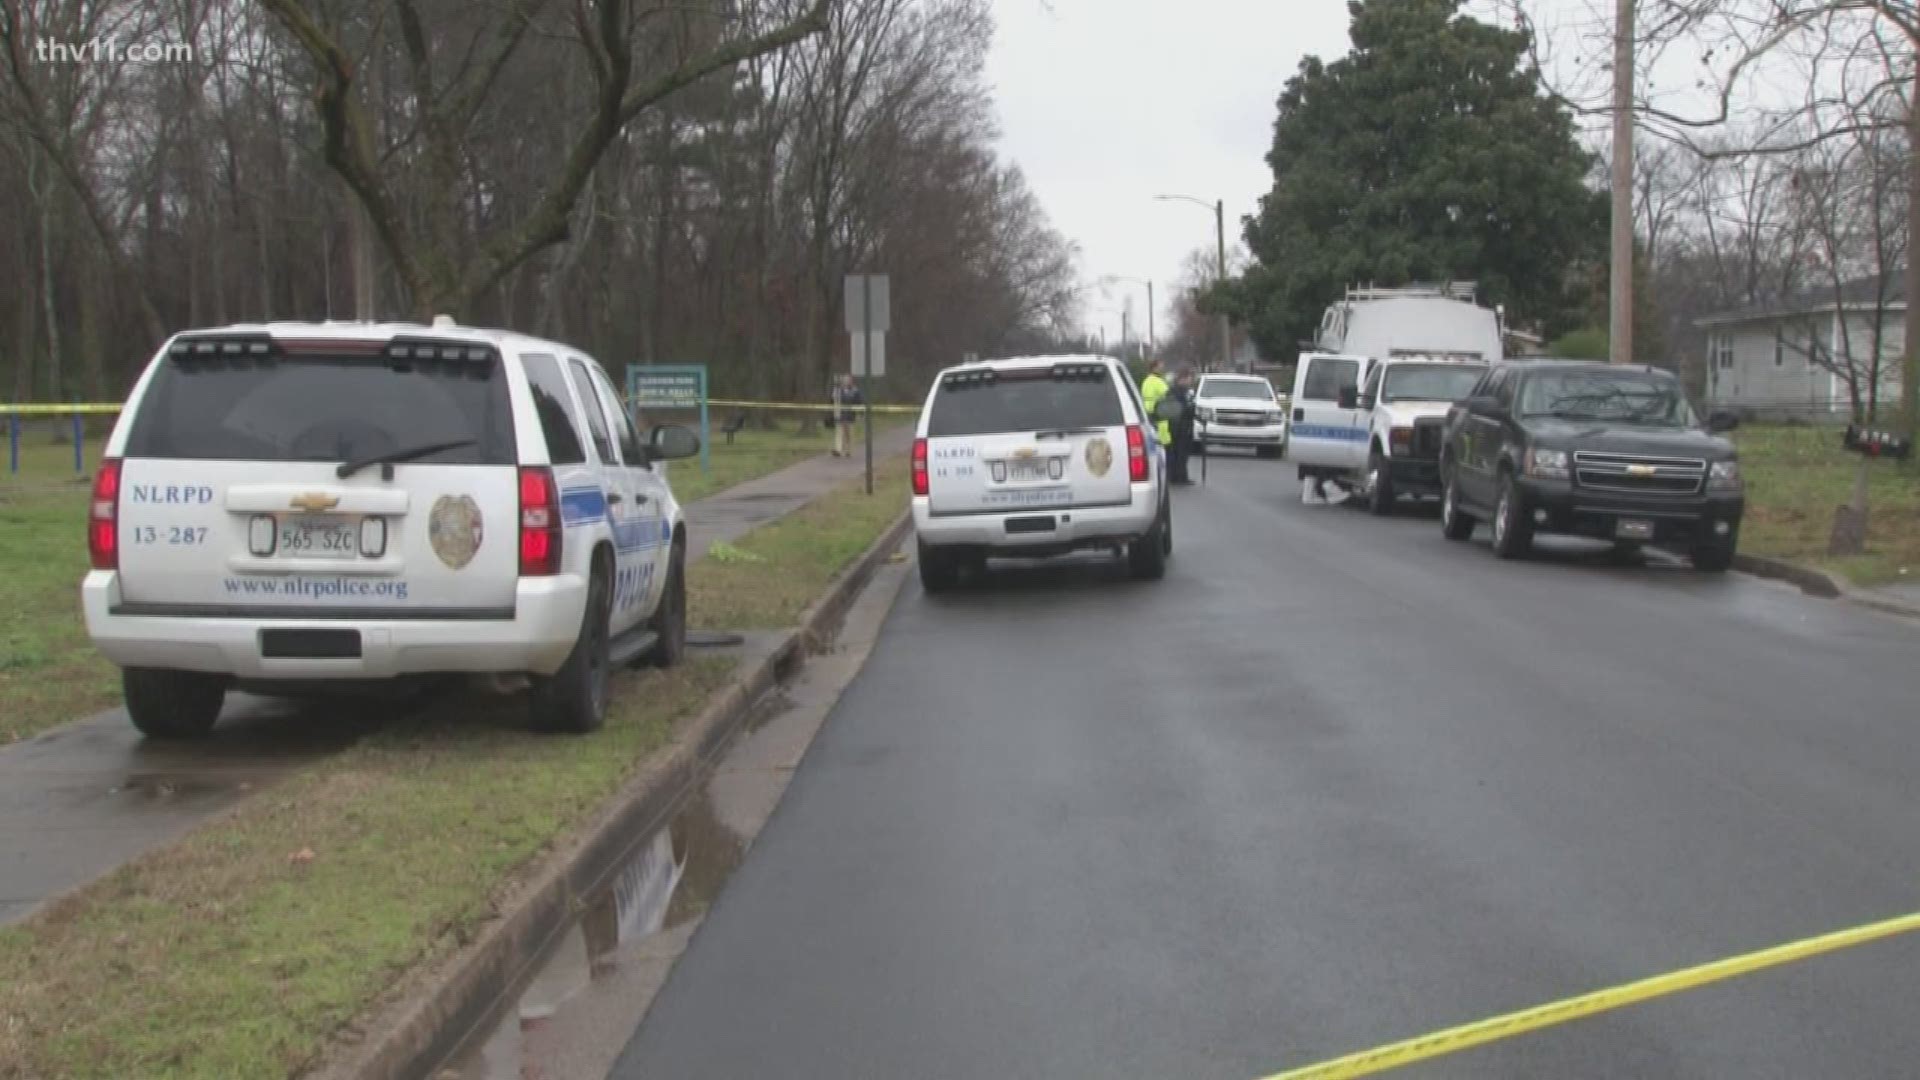 According to Sgt. Cooper with the North Little Rock Police Department, two victims were found shot in a home on Ben Street at around 12:45 p.m.